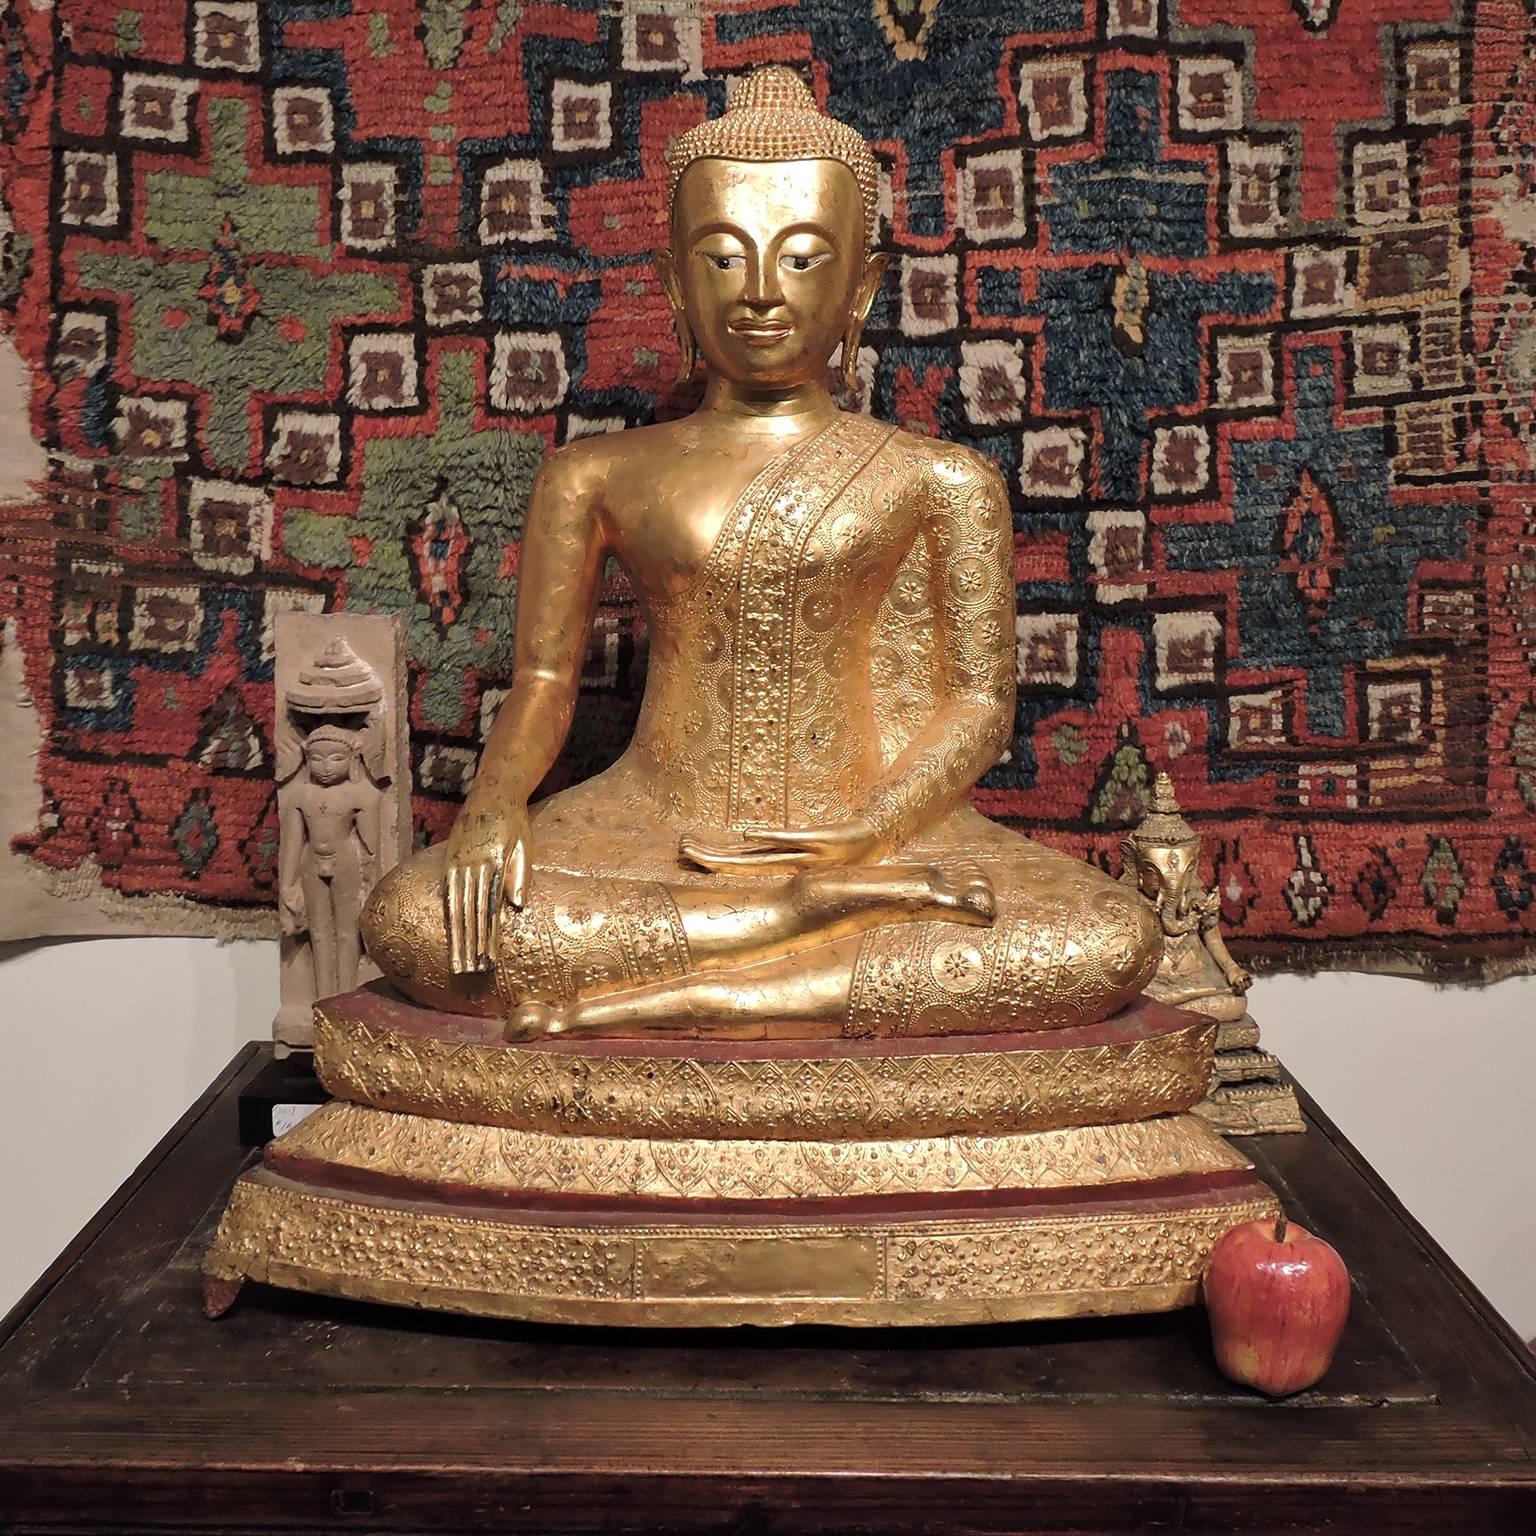 Large Rama IV Gilt Bronze Buddha, Thailand, 19th century; seated in touching the earth mudra on double lotus base; with reflective inlay and green gemstone eyes. From a very prominent American collection, full provenance available to